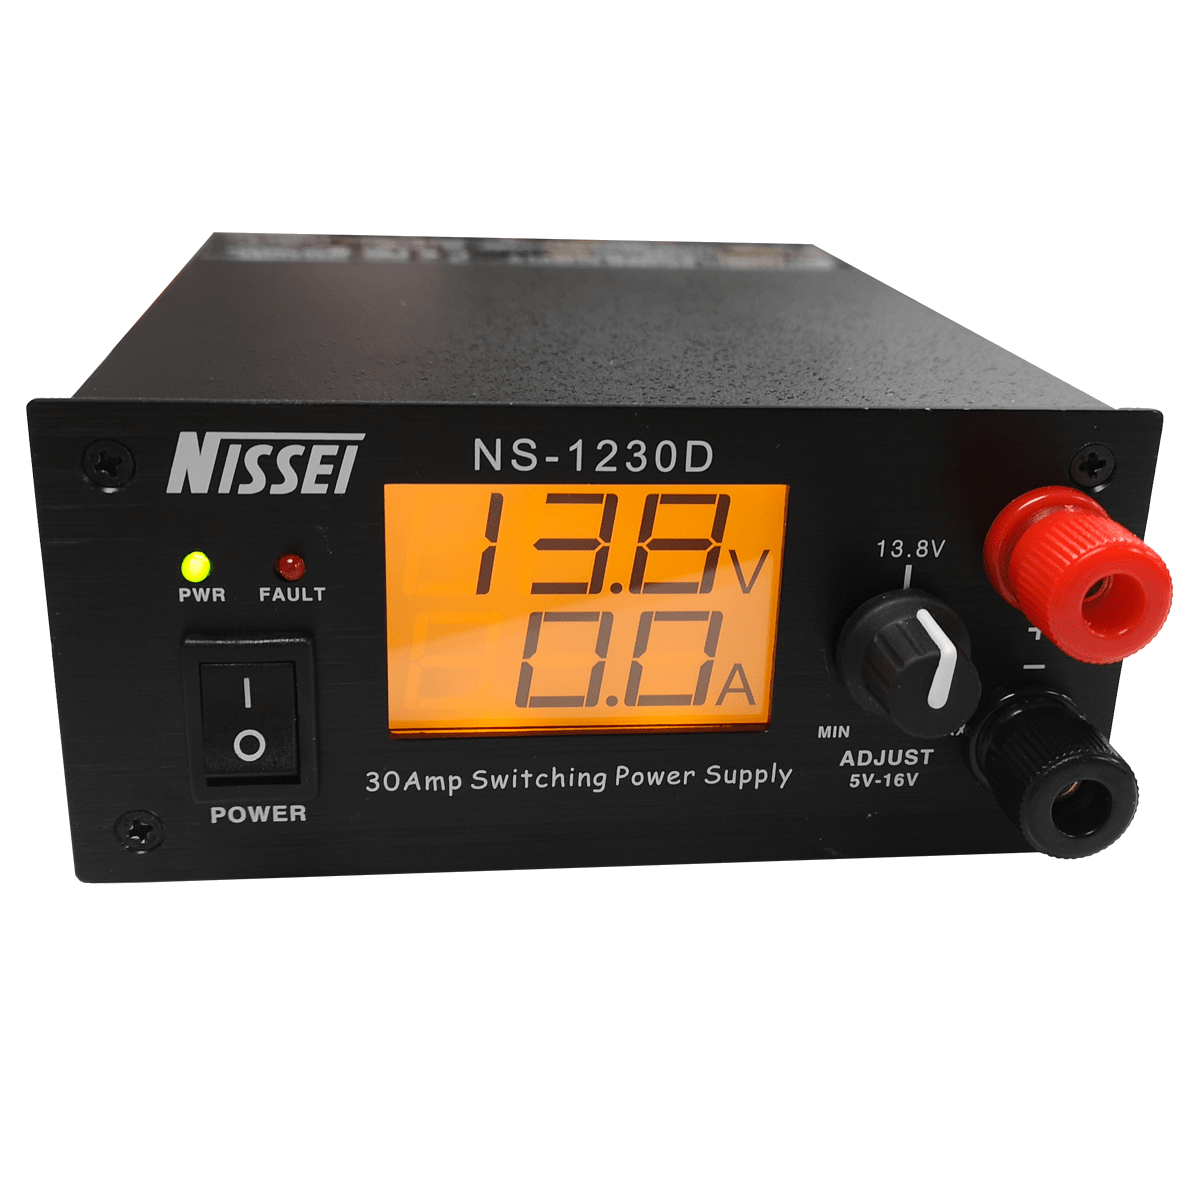 Nissei NS-1230D Switching Power Supply Unit